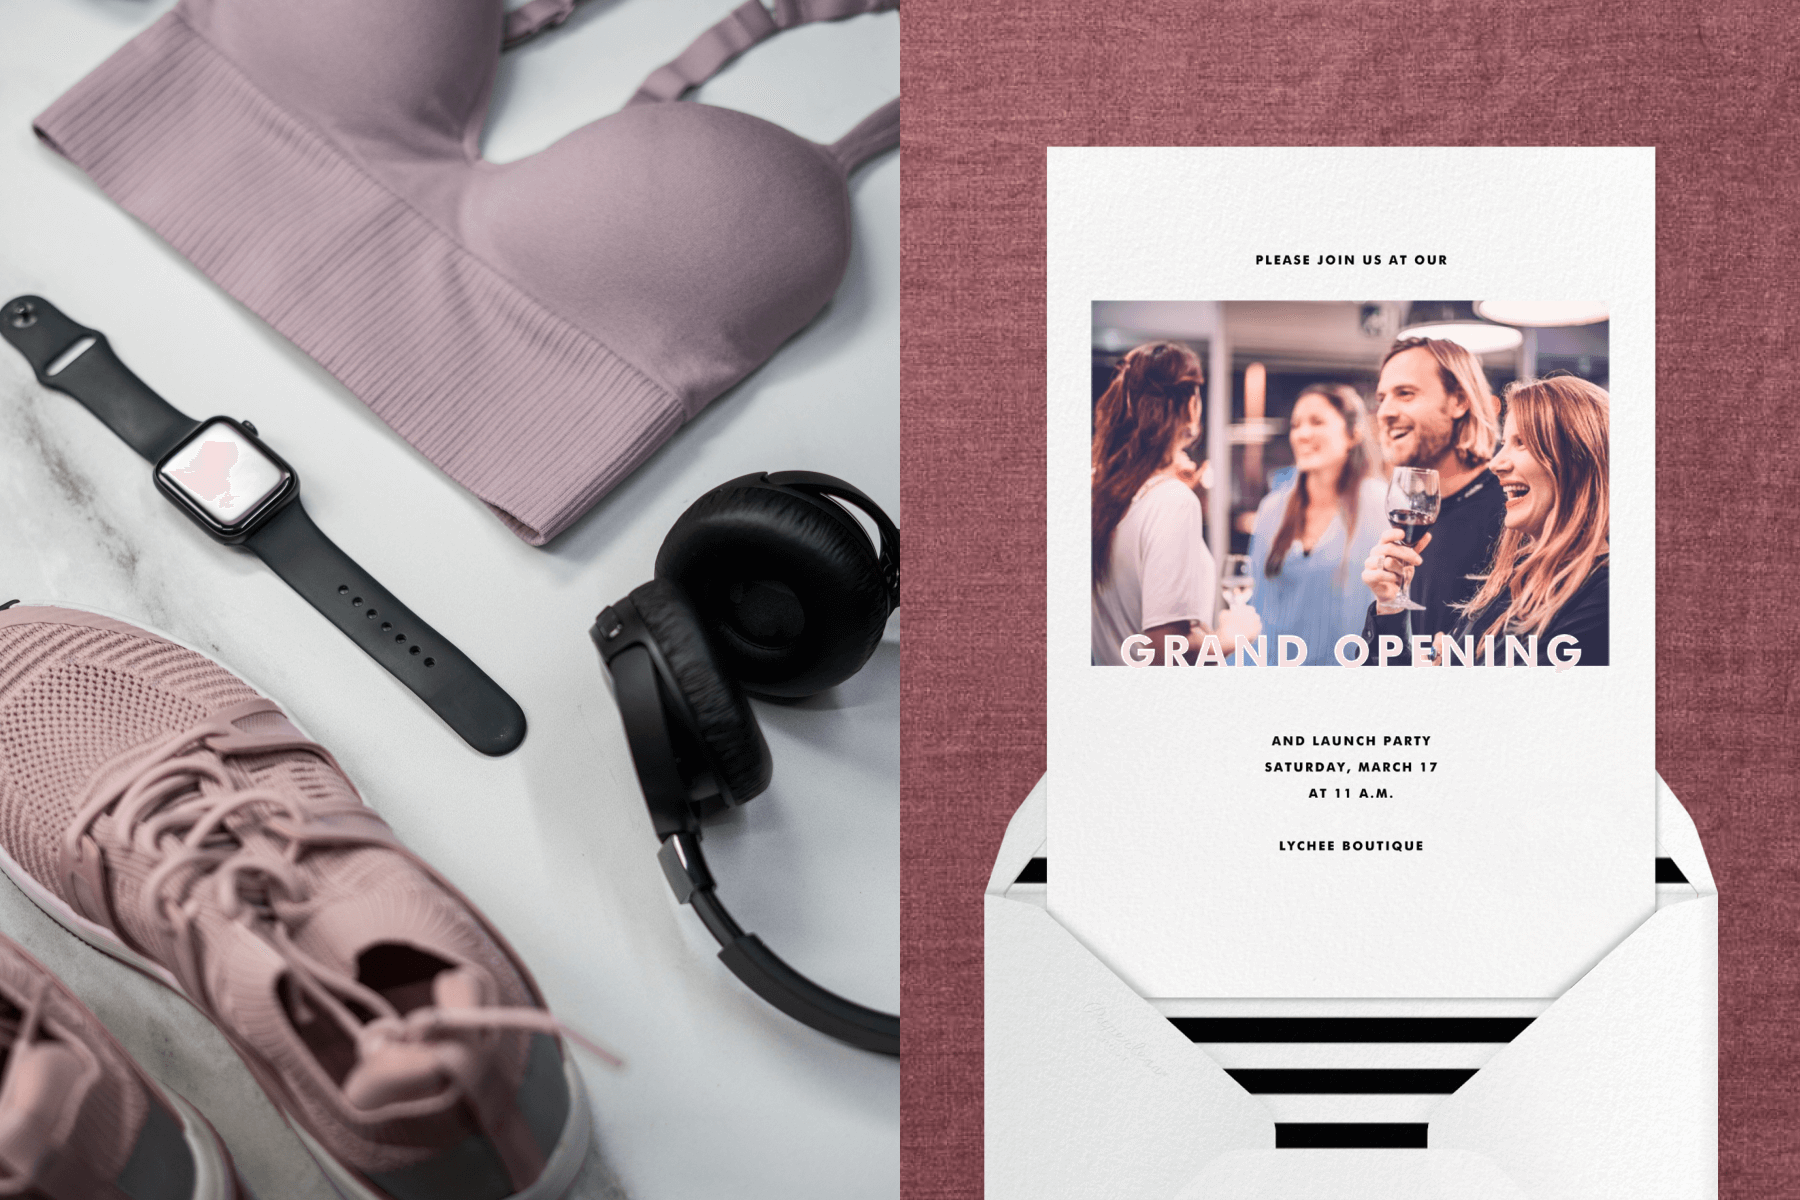 Left: Women’s gym clothes, sneakers, headphone, and smartwatch. Right: An invitation with a photo of people holding wine.